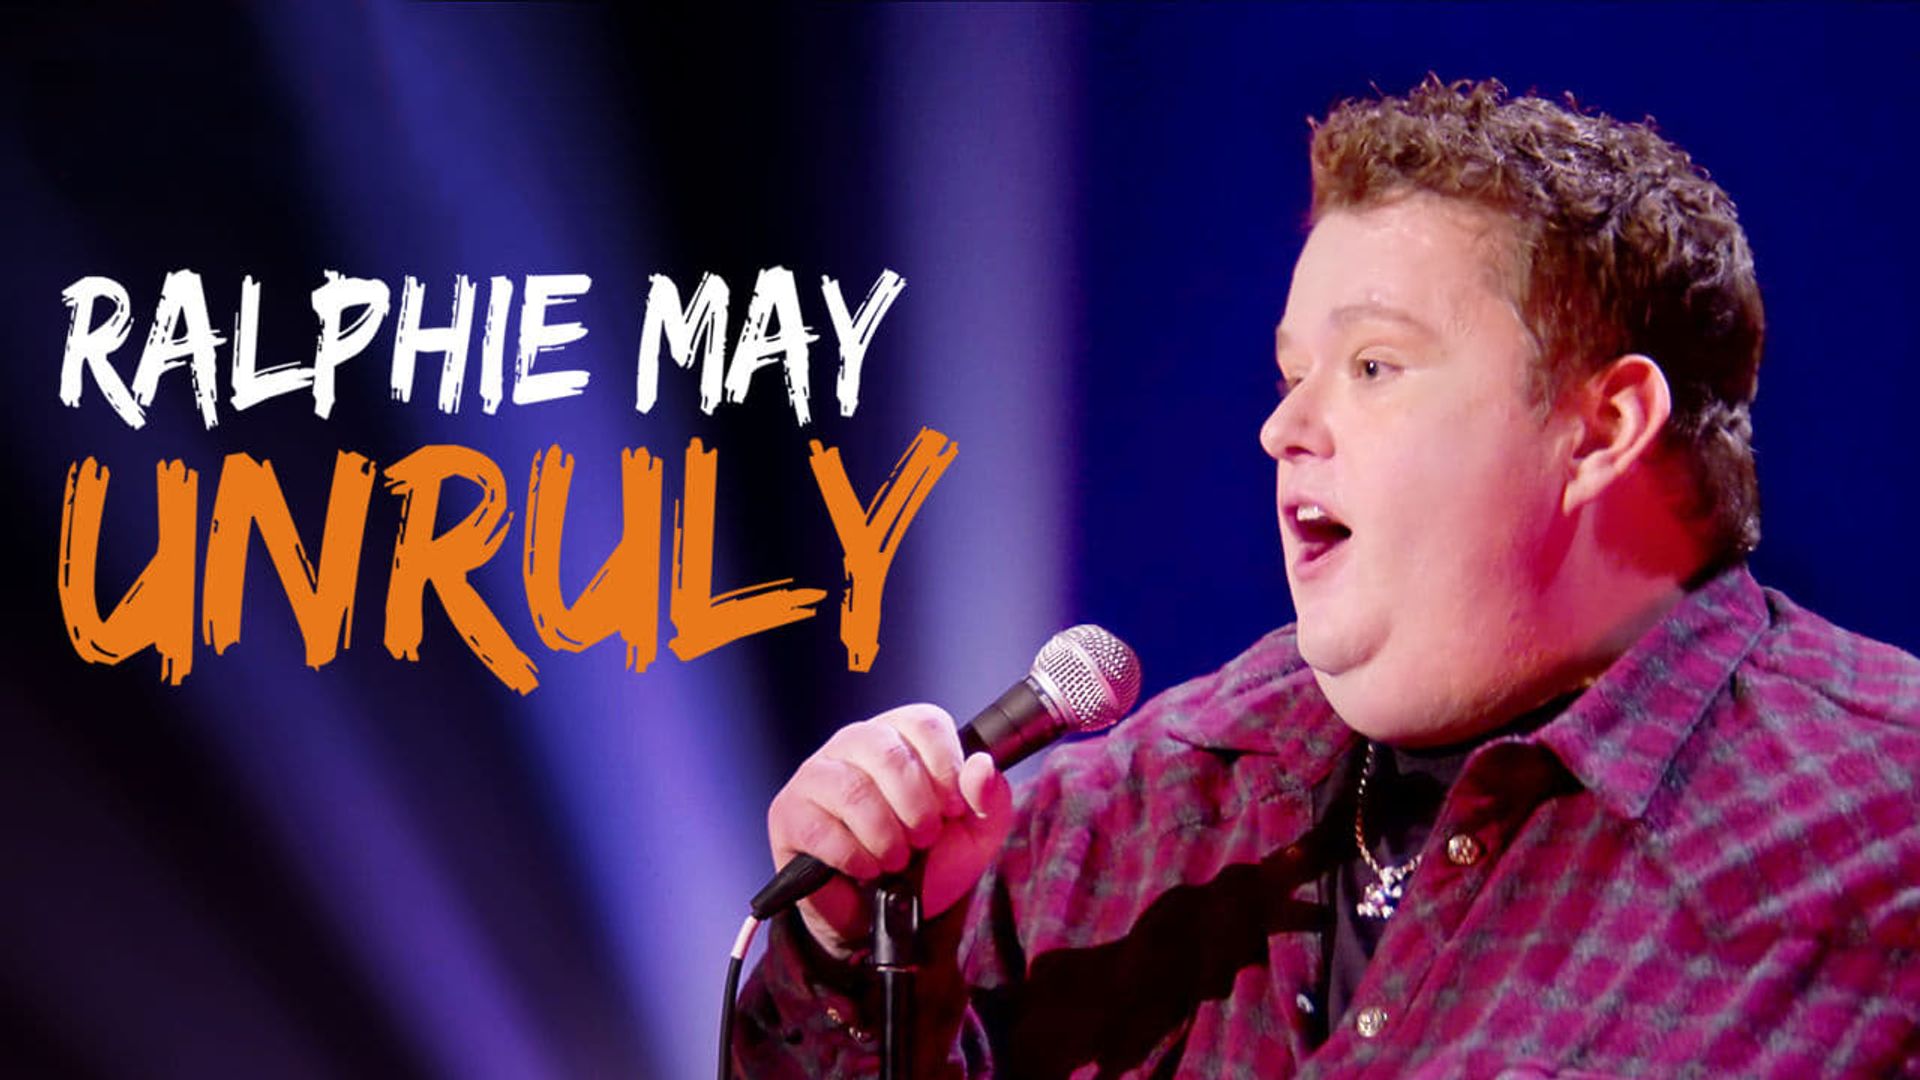 Ralphie May: Unruly background